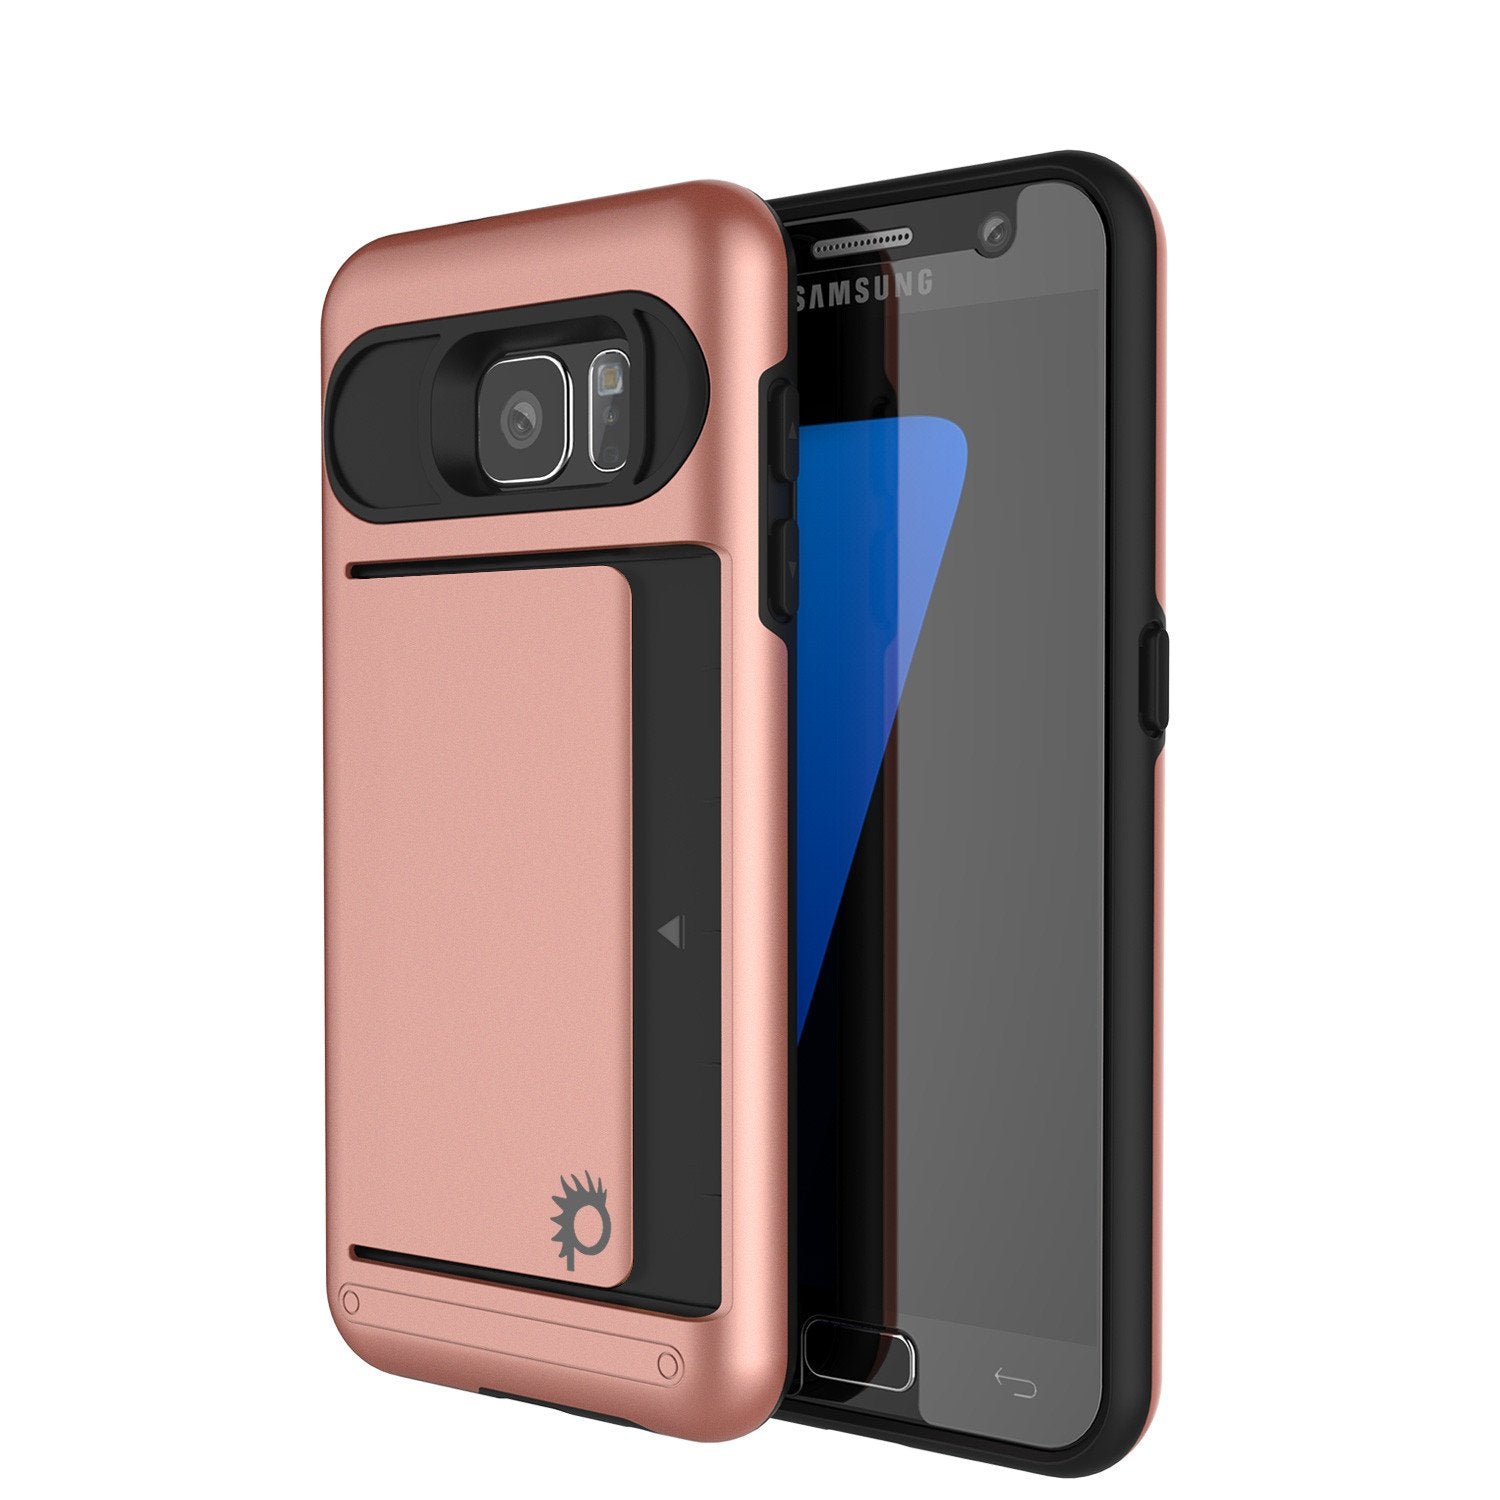 Punkcase Galaxy S7 EDGE Slim Armor Soft Cover | CLUTCH Rose Gold Series